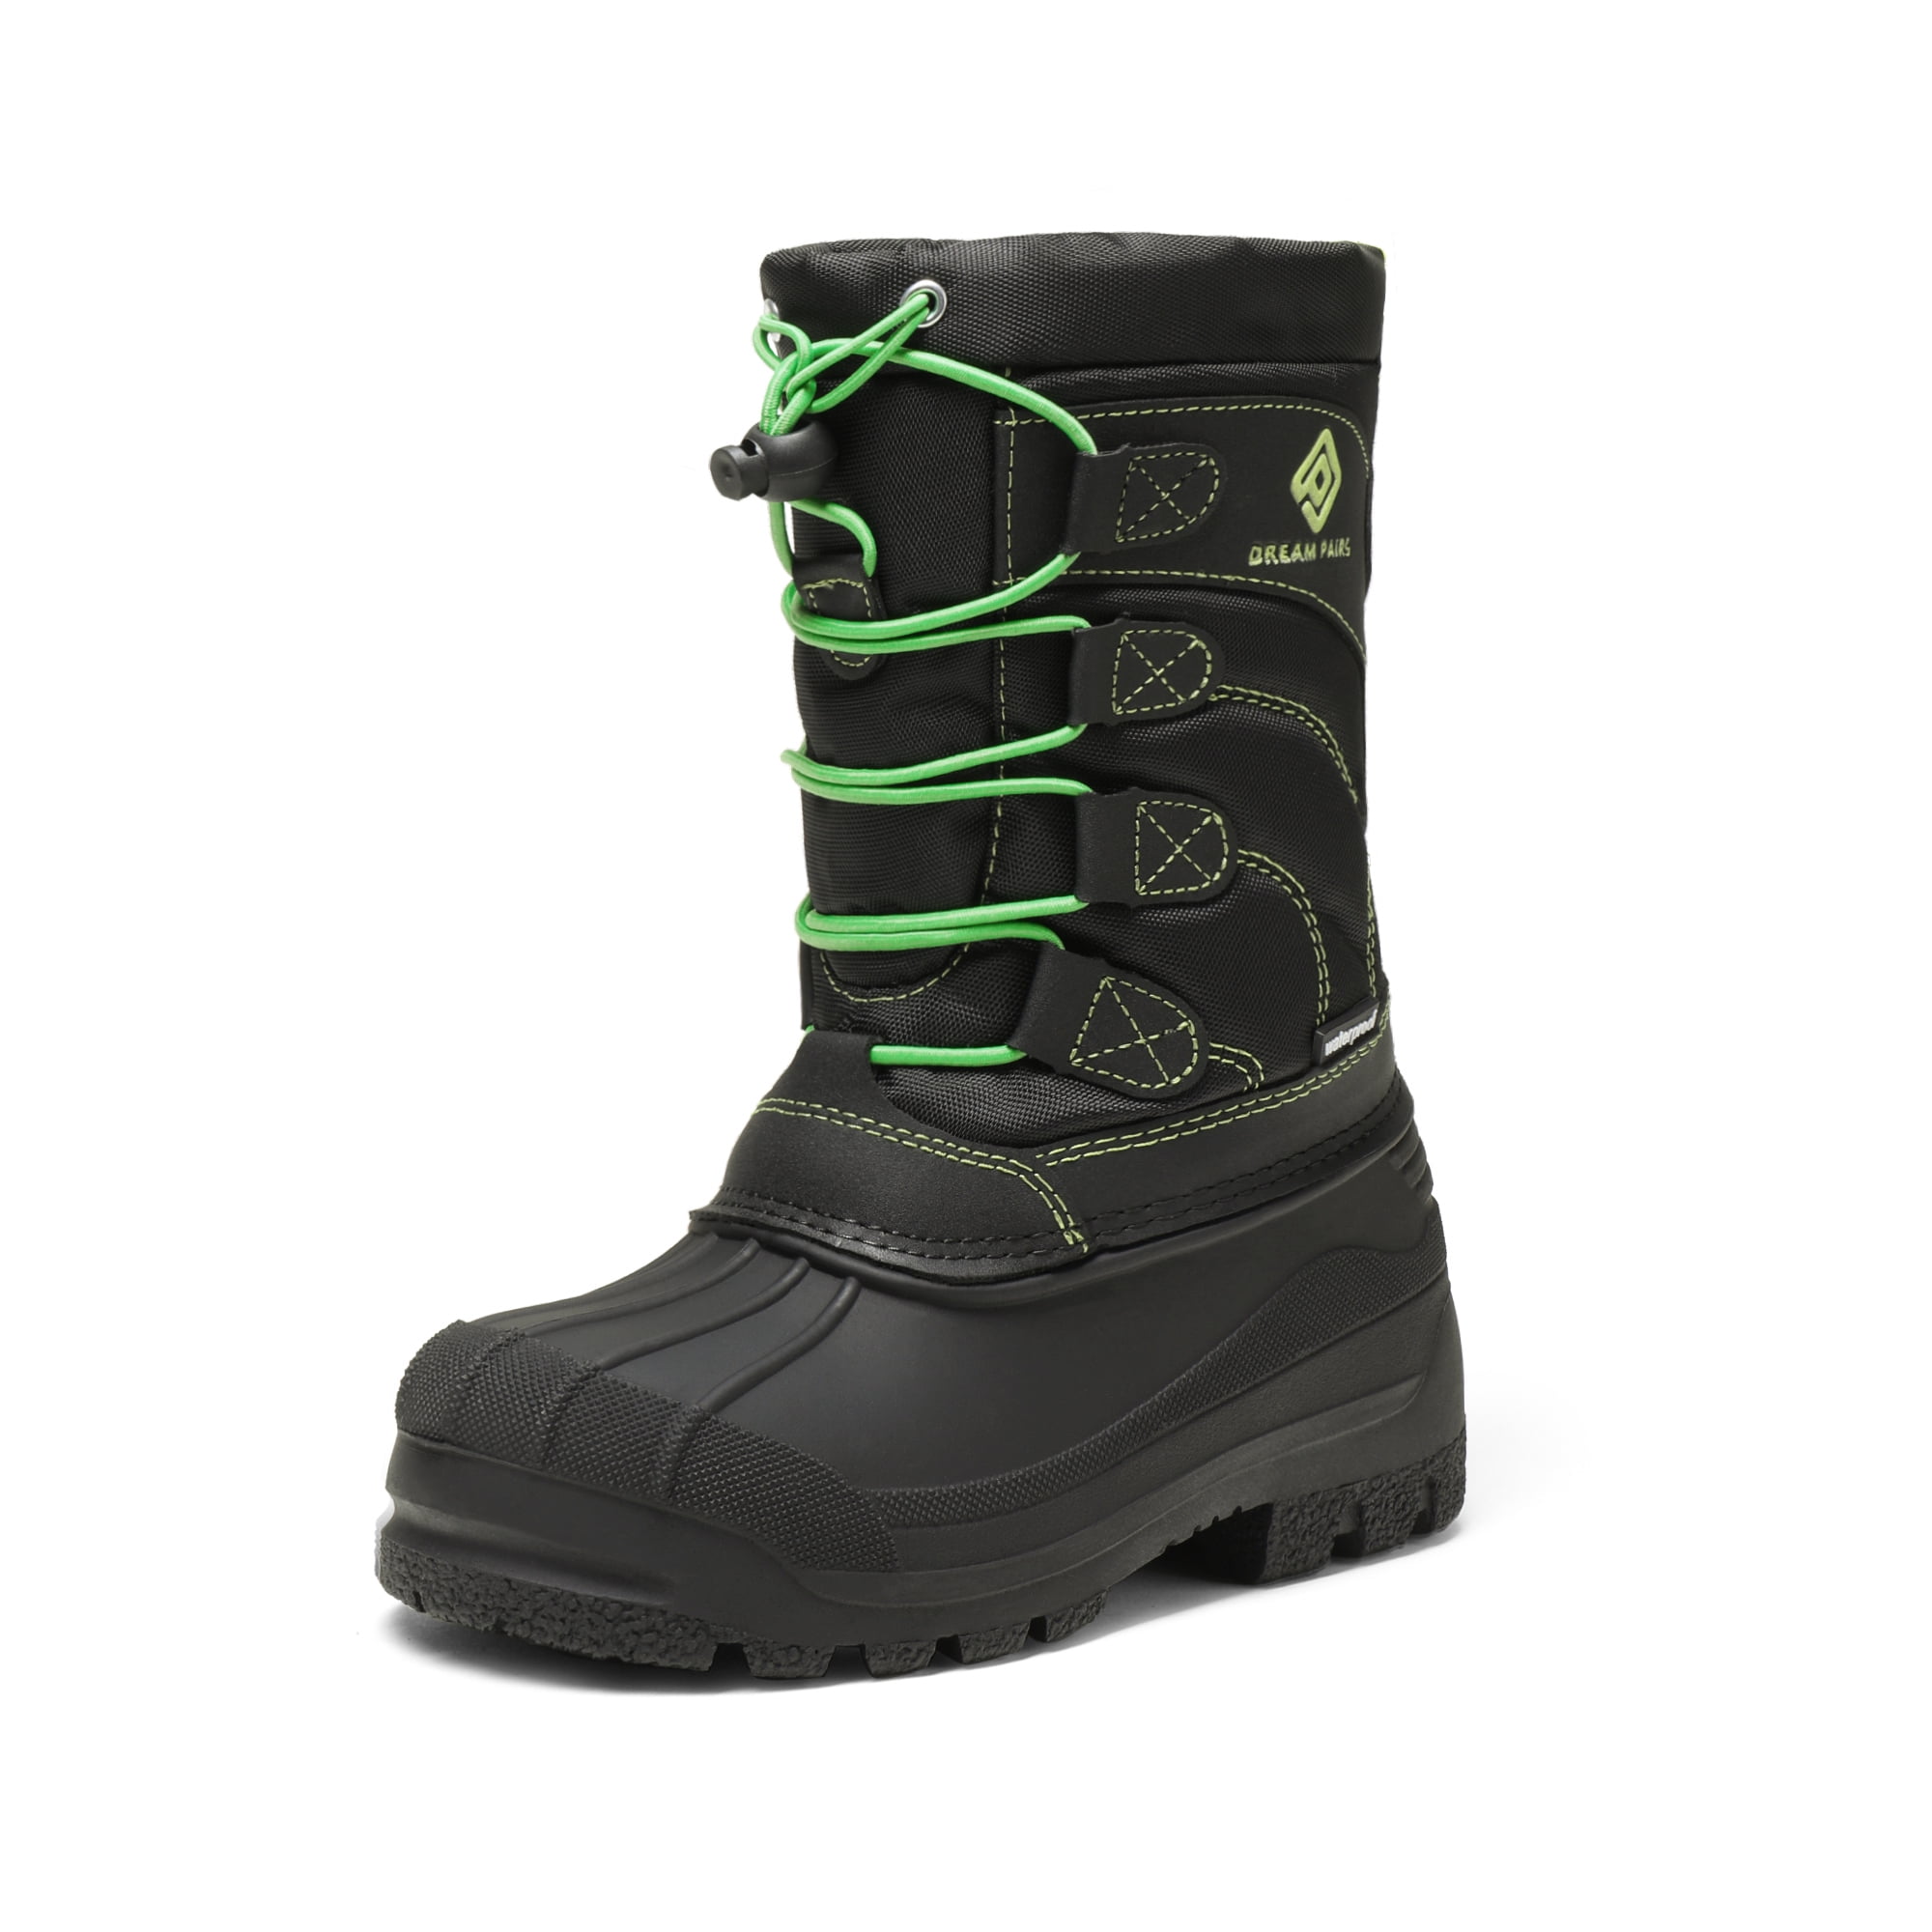 Thermolite Toddler Boys' Winter Boots Snow Green Size 4 